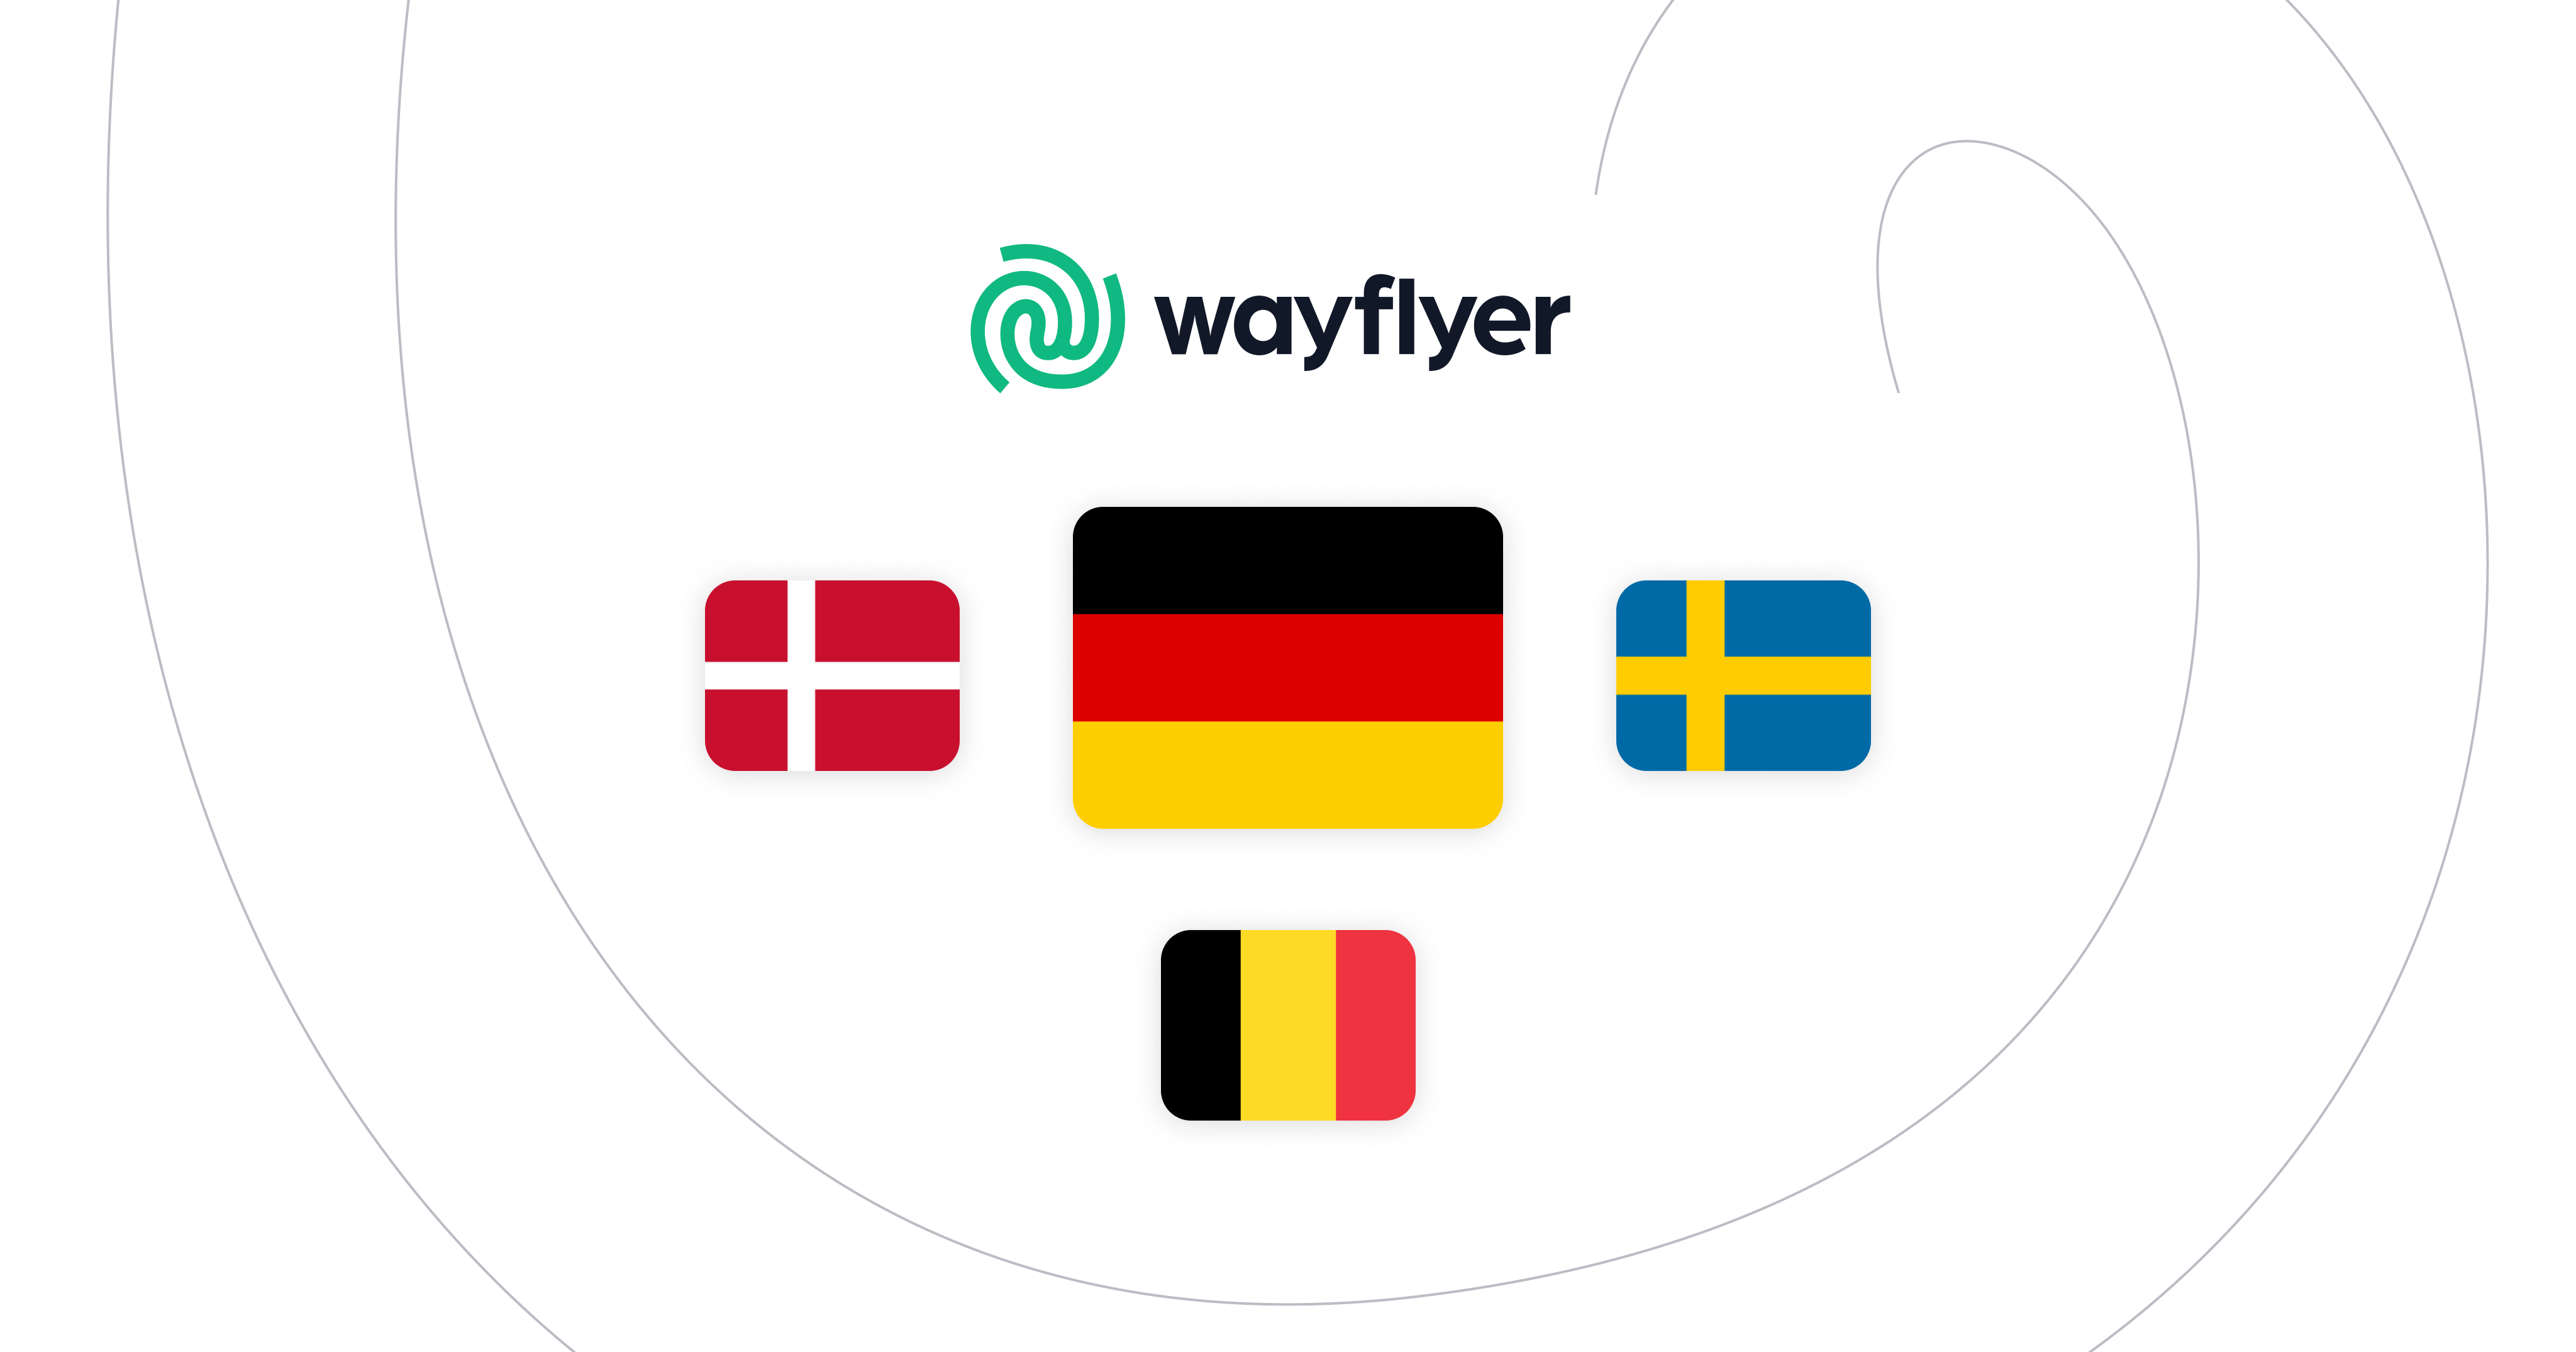 Announcing our expansion in Germany, Sweden, Belgium, and Denmark